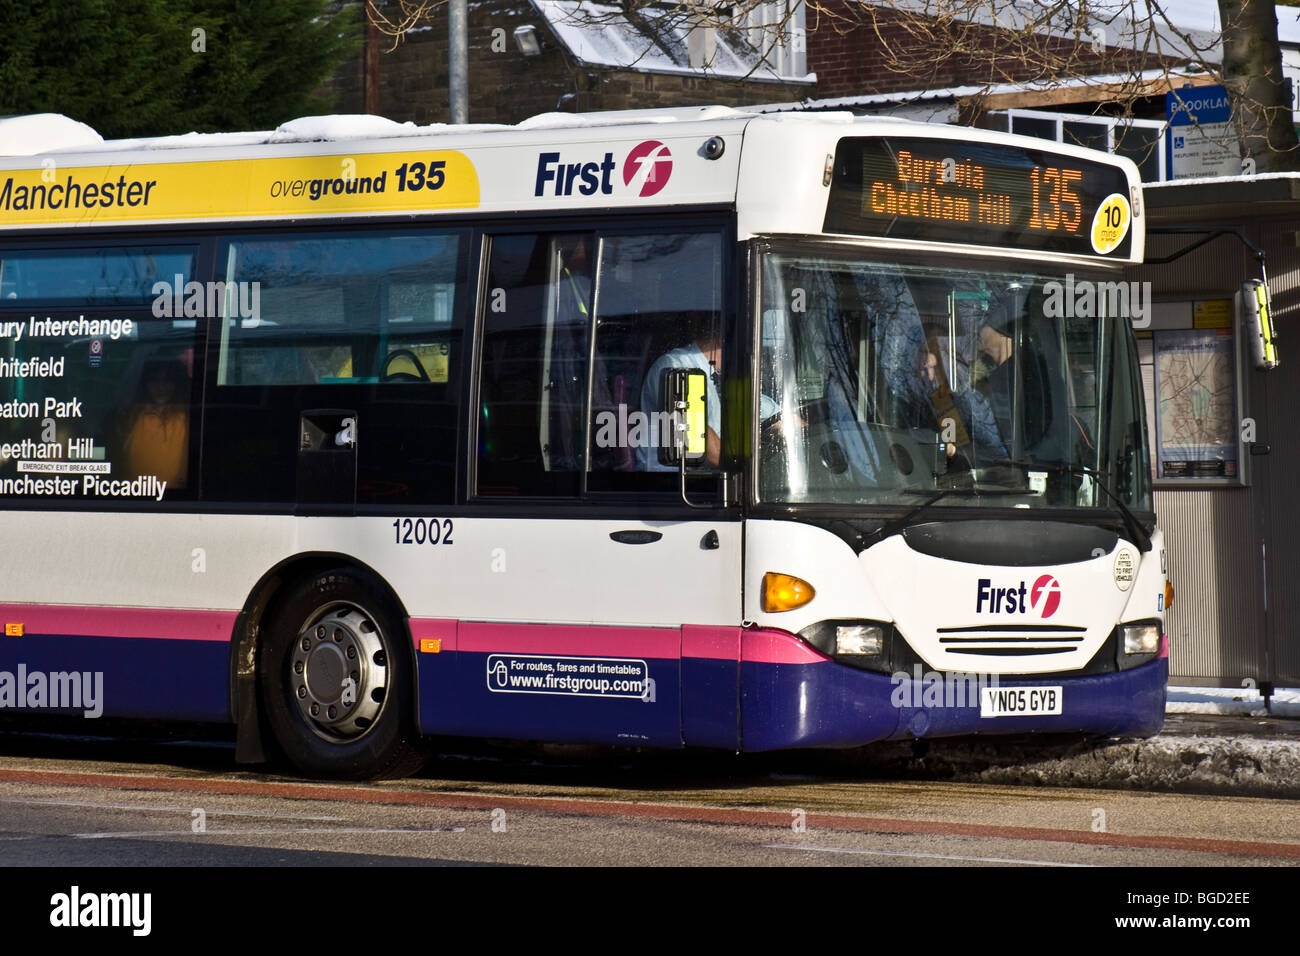 Bendy bus run by First Bus on Bury to Manchester route. Bury Old Road, Prestwich, Manchester, UK Stock Photo